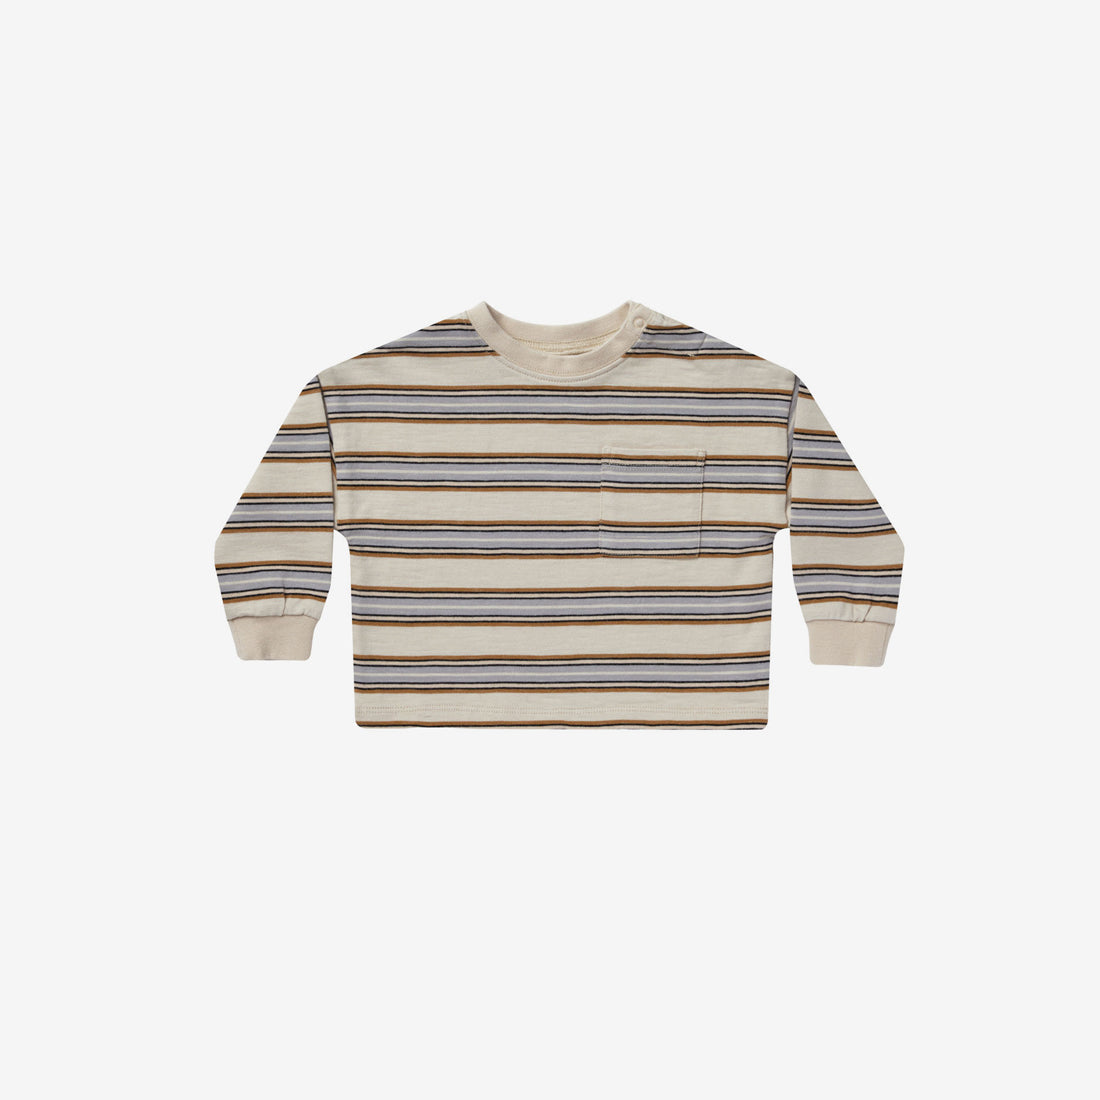 Relaxed Cotton Jersey L/S Tee - Vintage Stripe